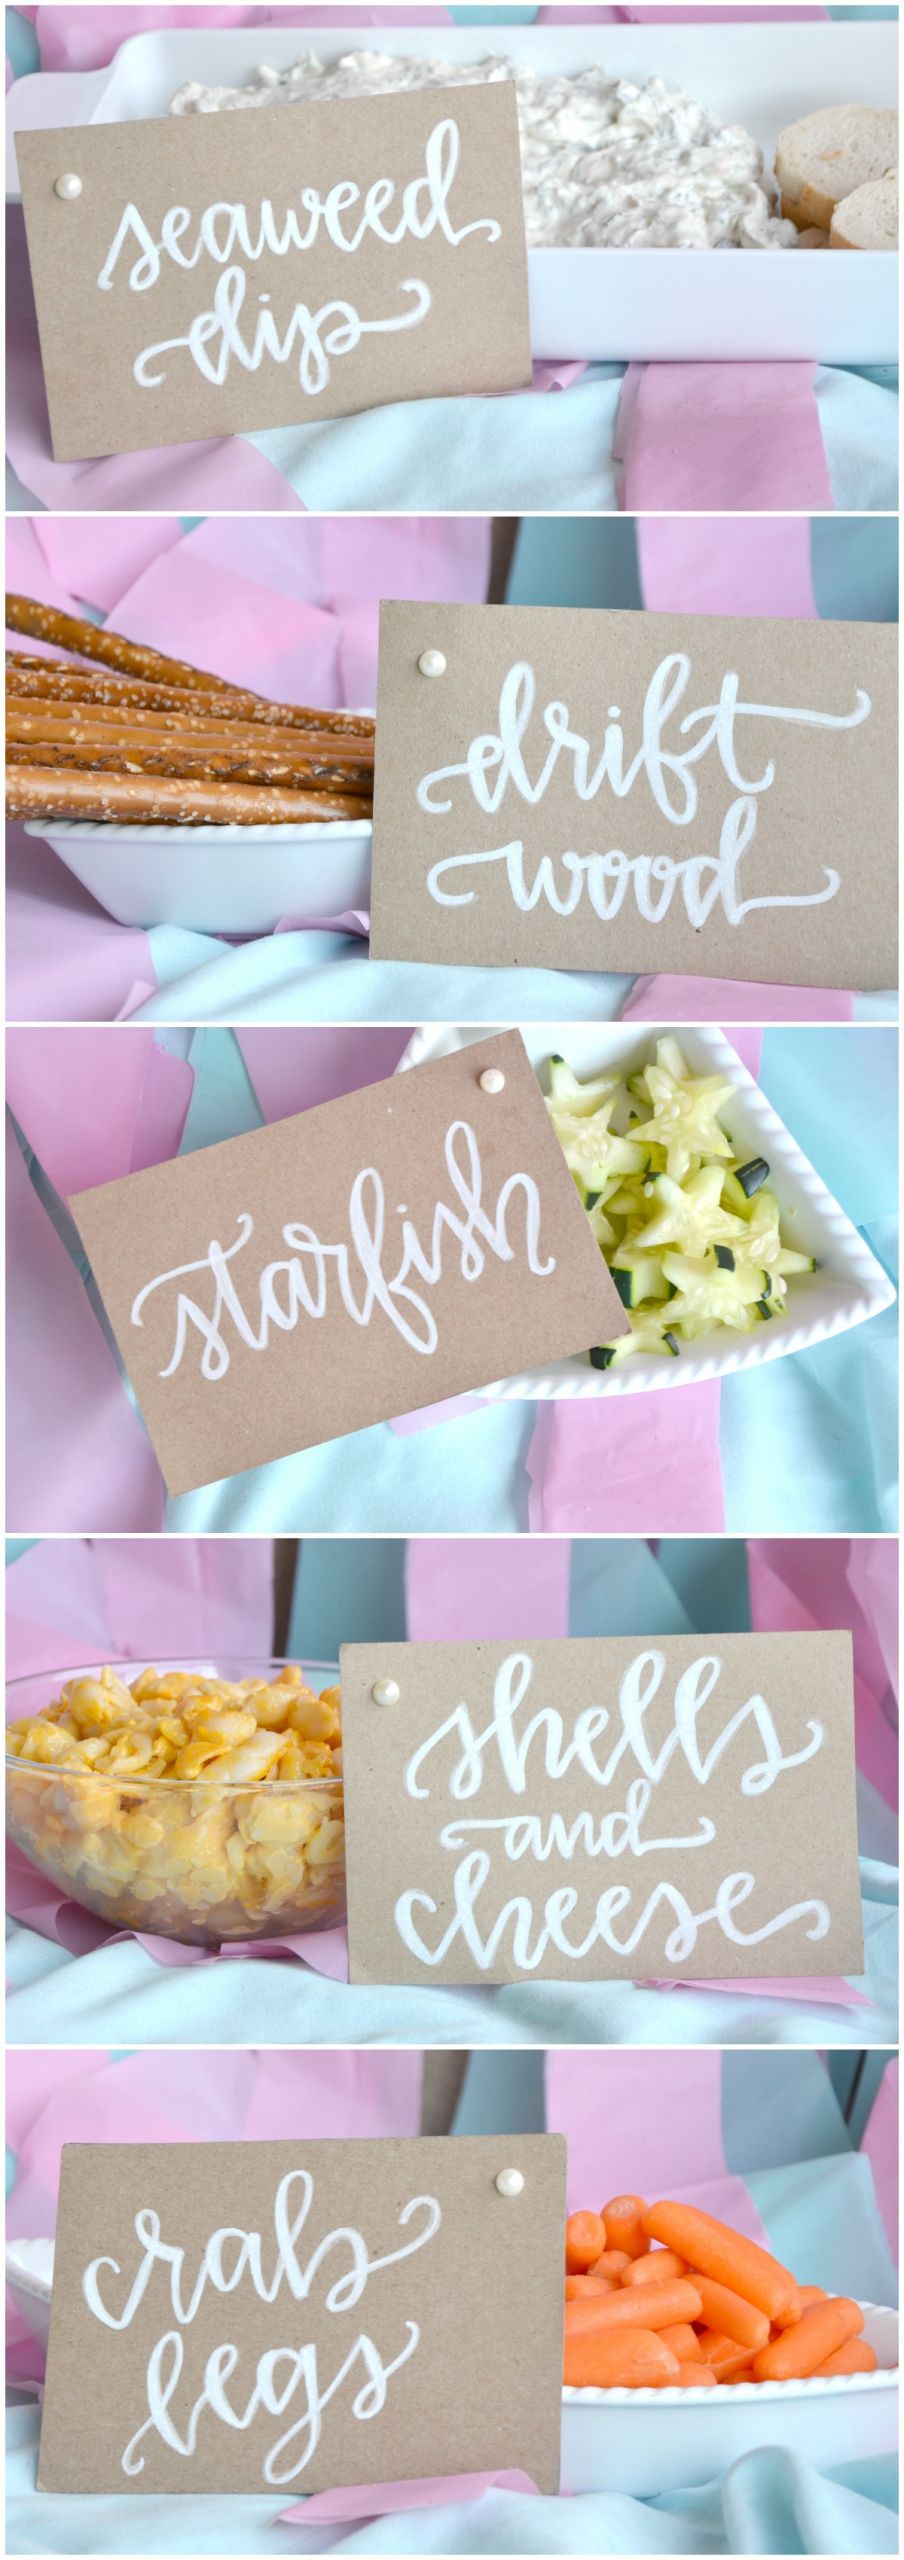 Little Mermaid Party Snack Ideas
 First Birthday Mermaid Party Brie Brie Blooms